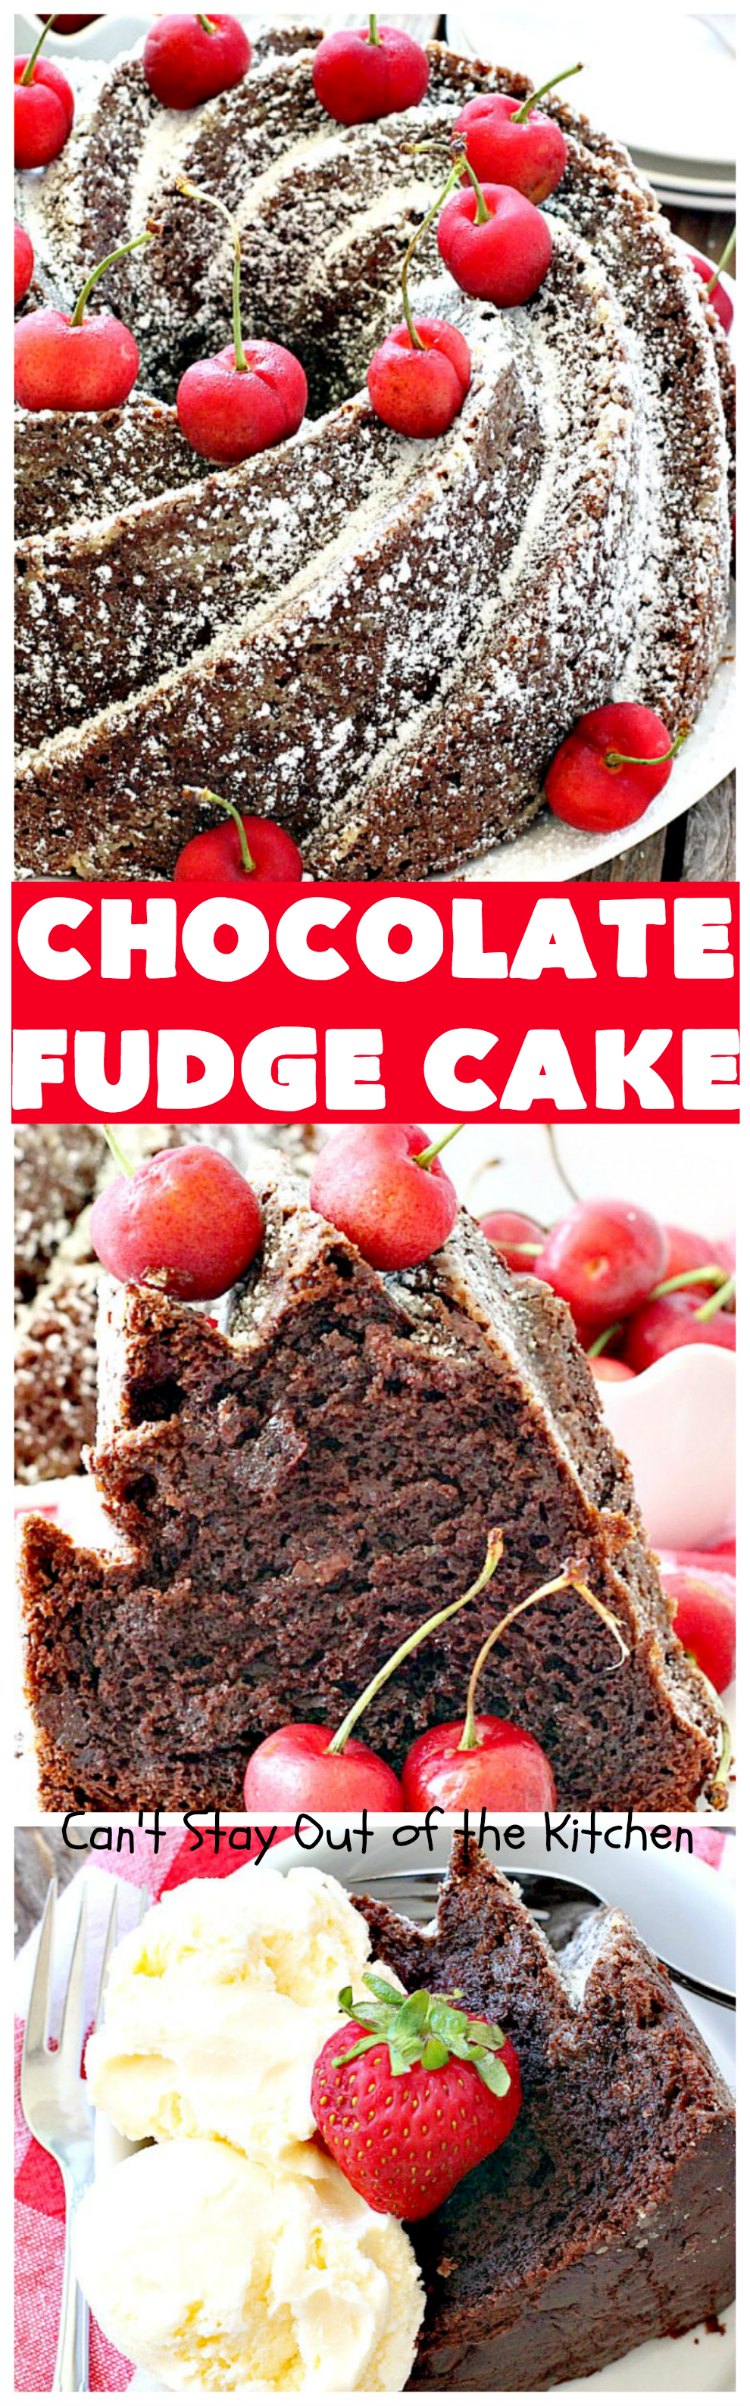 Chocolate Fudge Cake | Can't Stay Out of the Kitchen | This fabulous #chocolate #cake is incredibly fudgy since it includes a box of chocolate pudding and chocolate chips in the batter. Perfect for potlucks, backyard barbecues & #holiday parties. Quick & easy #dessert.